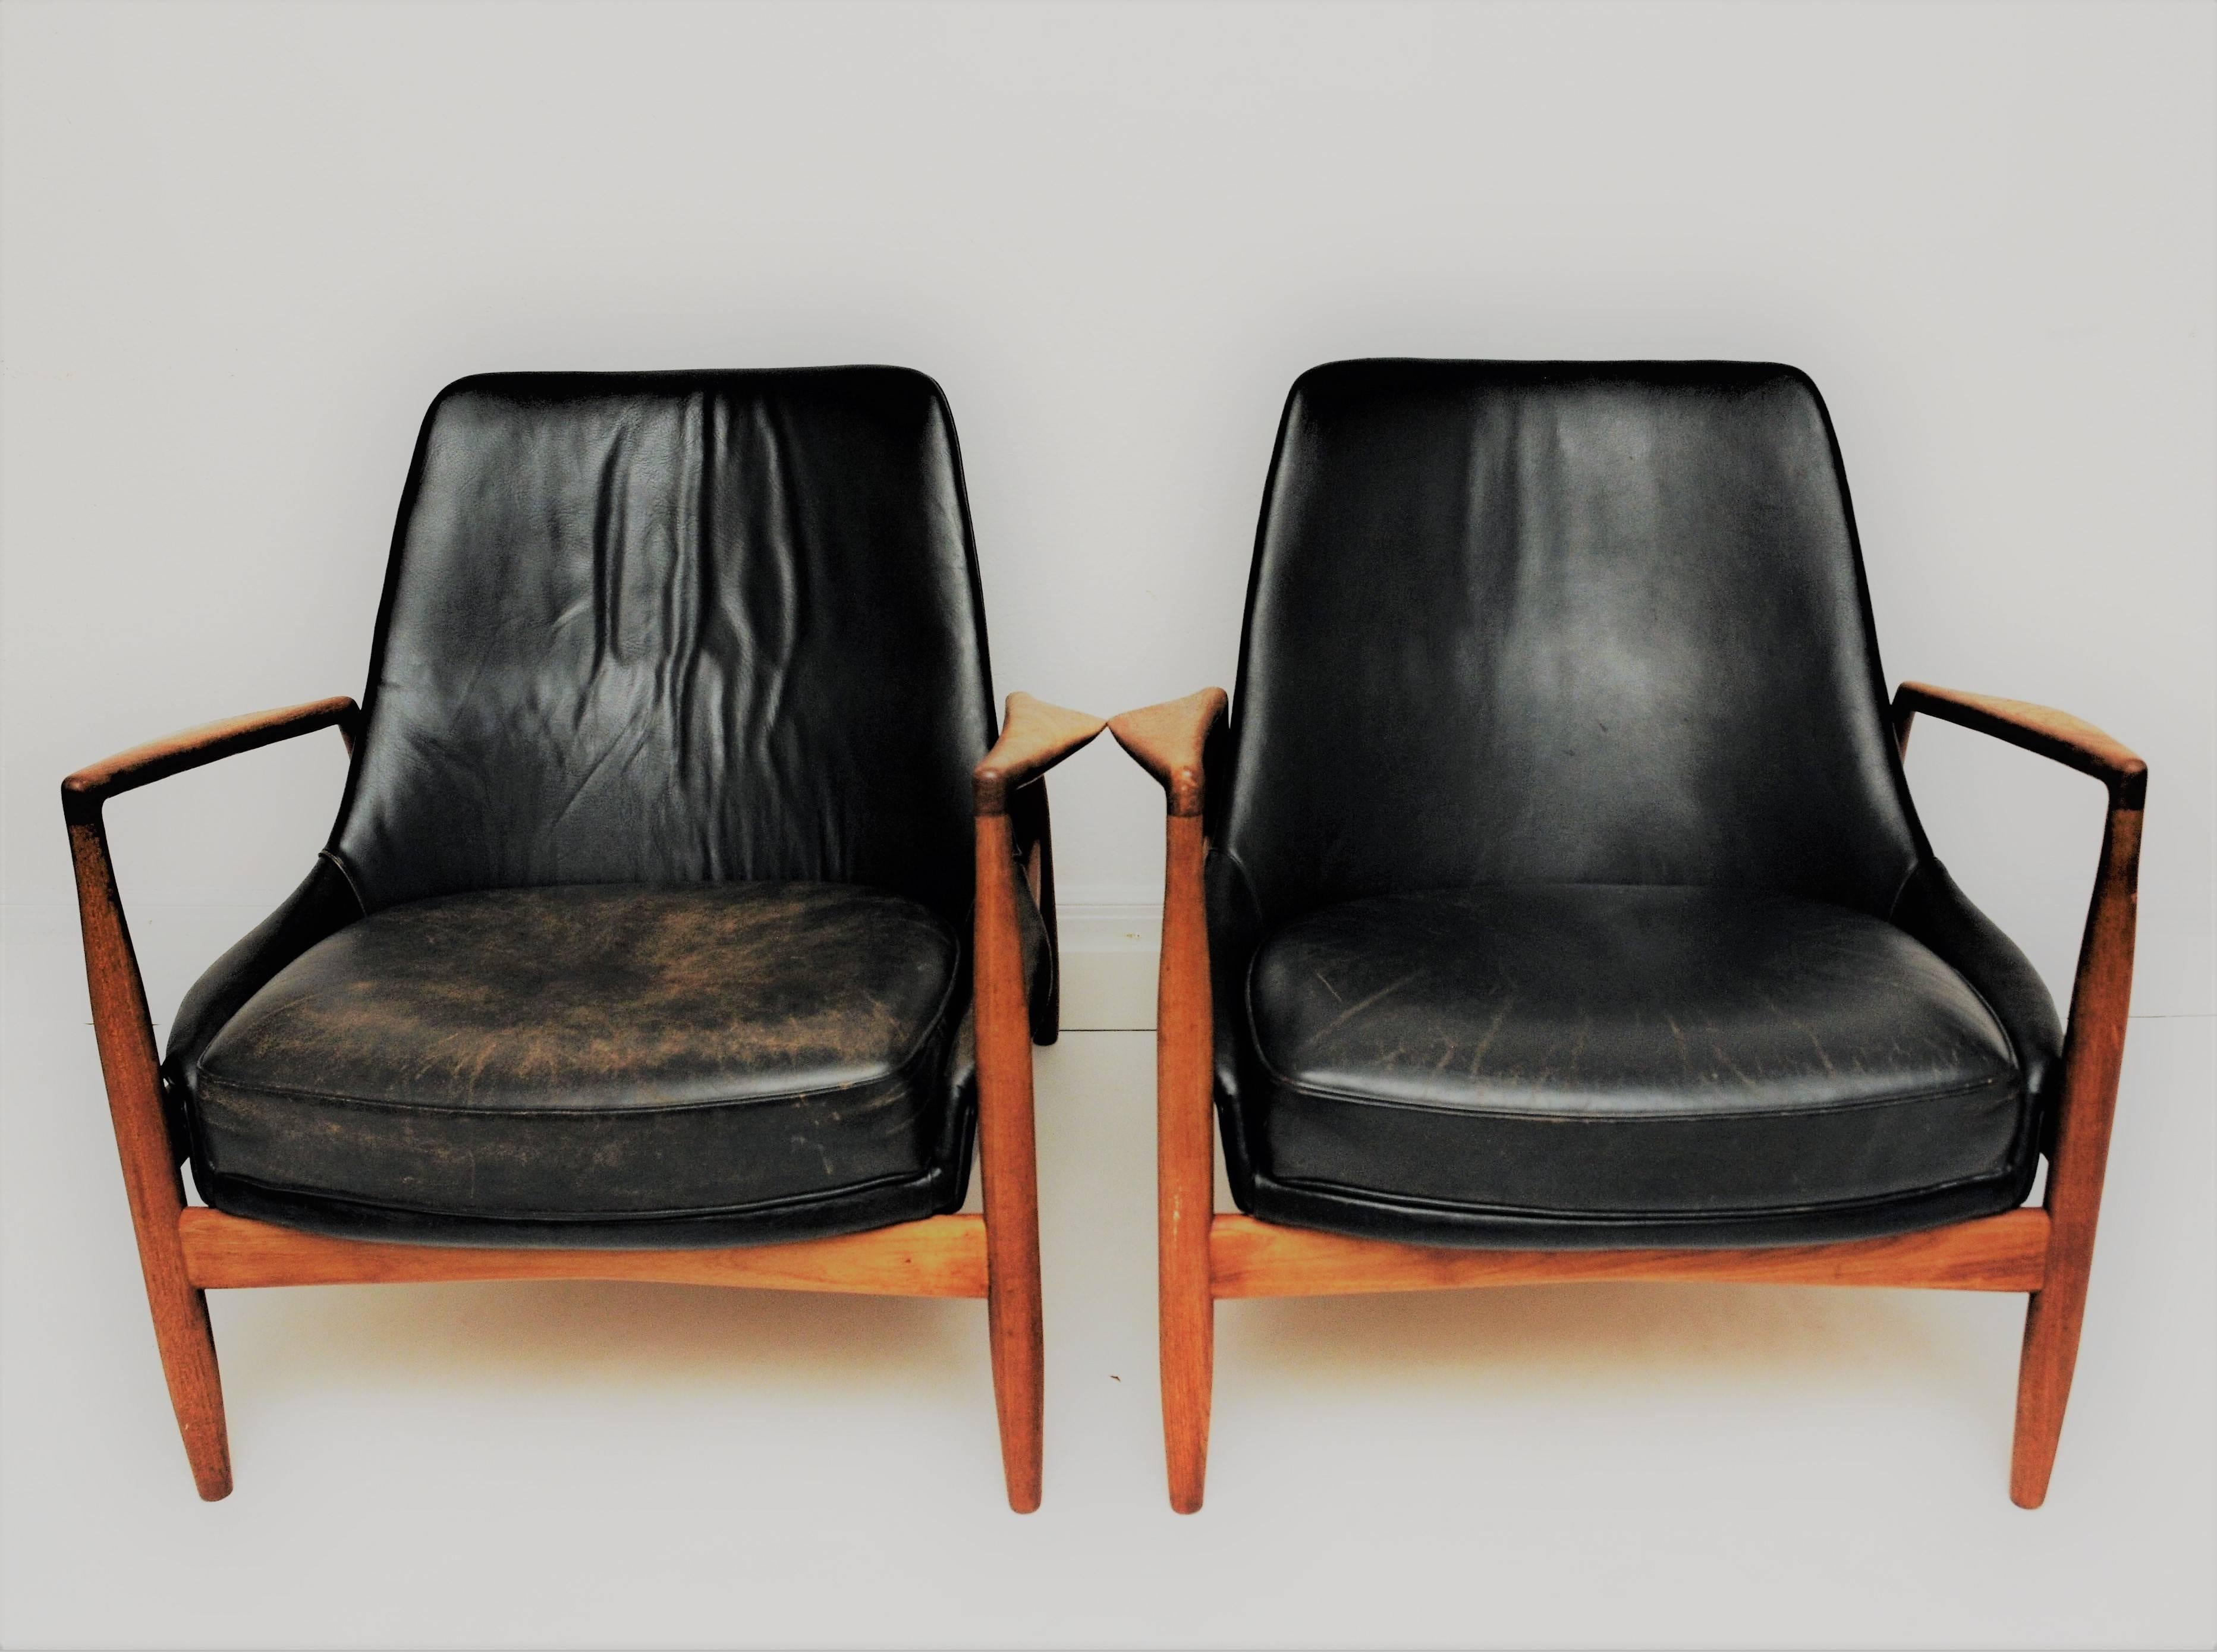 Swedish Pair of Sälen/Seal Easy Chairs by Ib Kofod-Larsen for OPE 1957, Set of Two